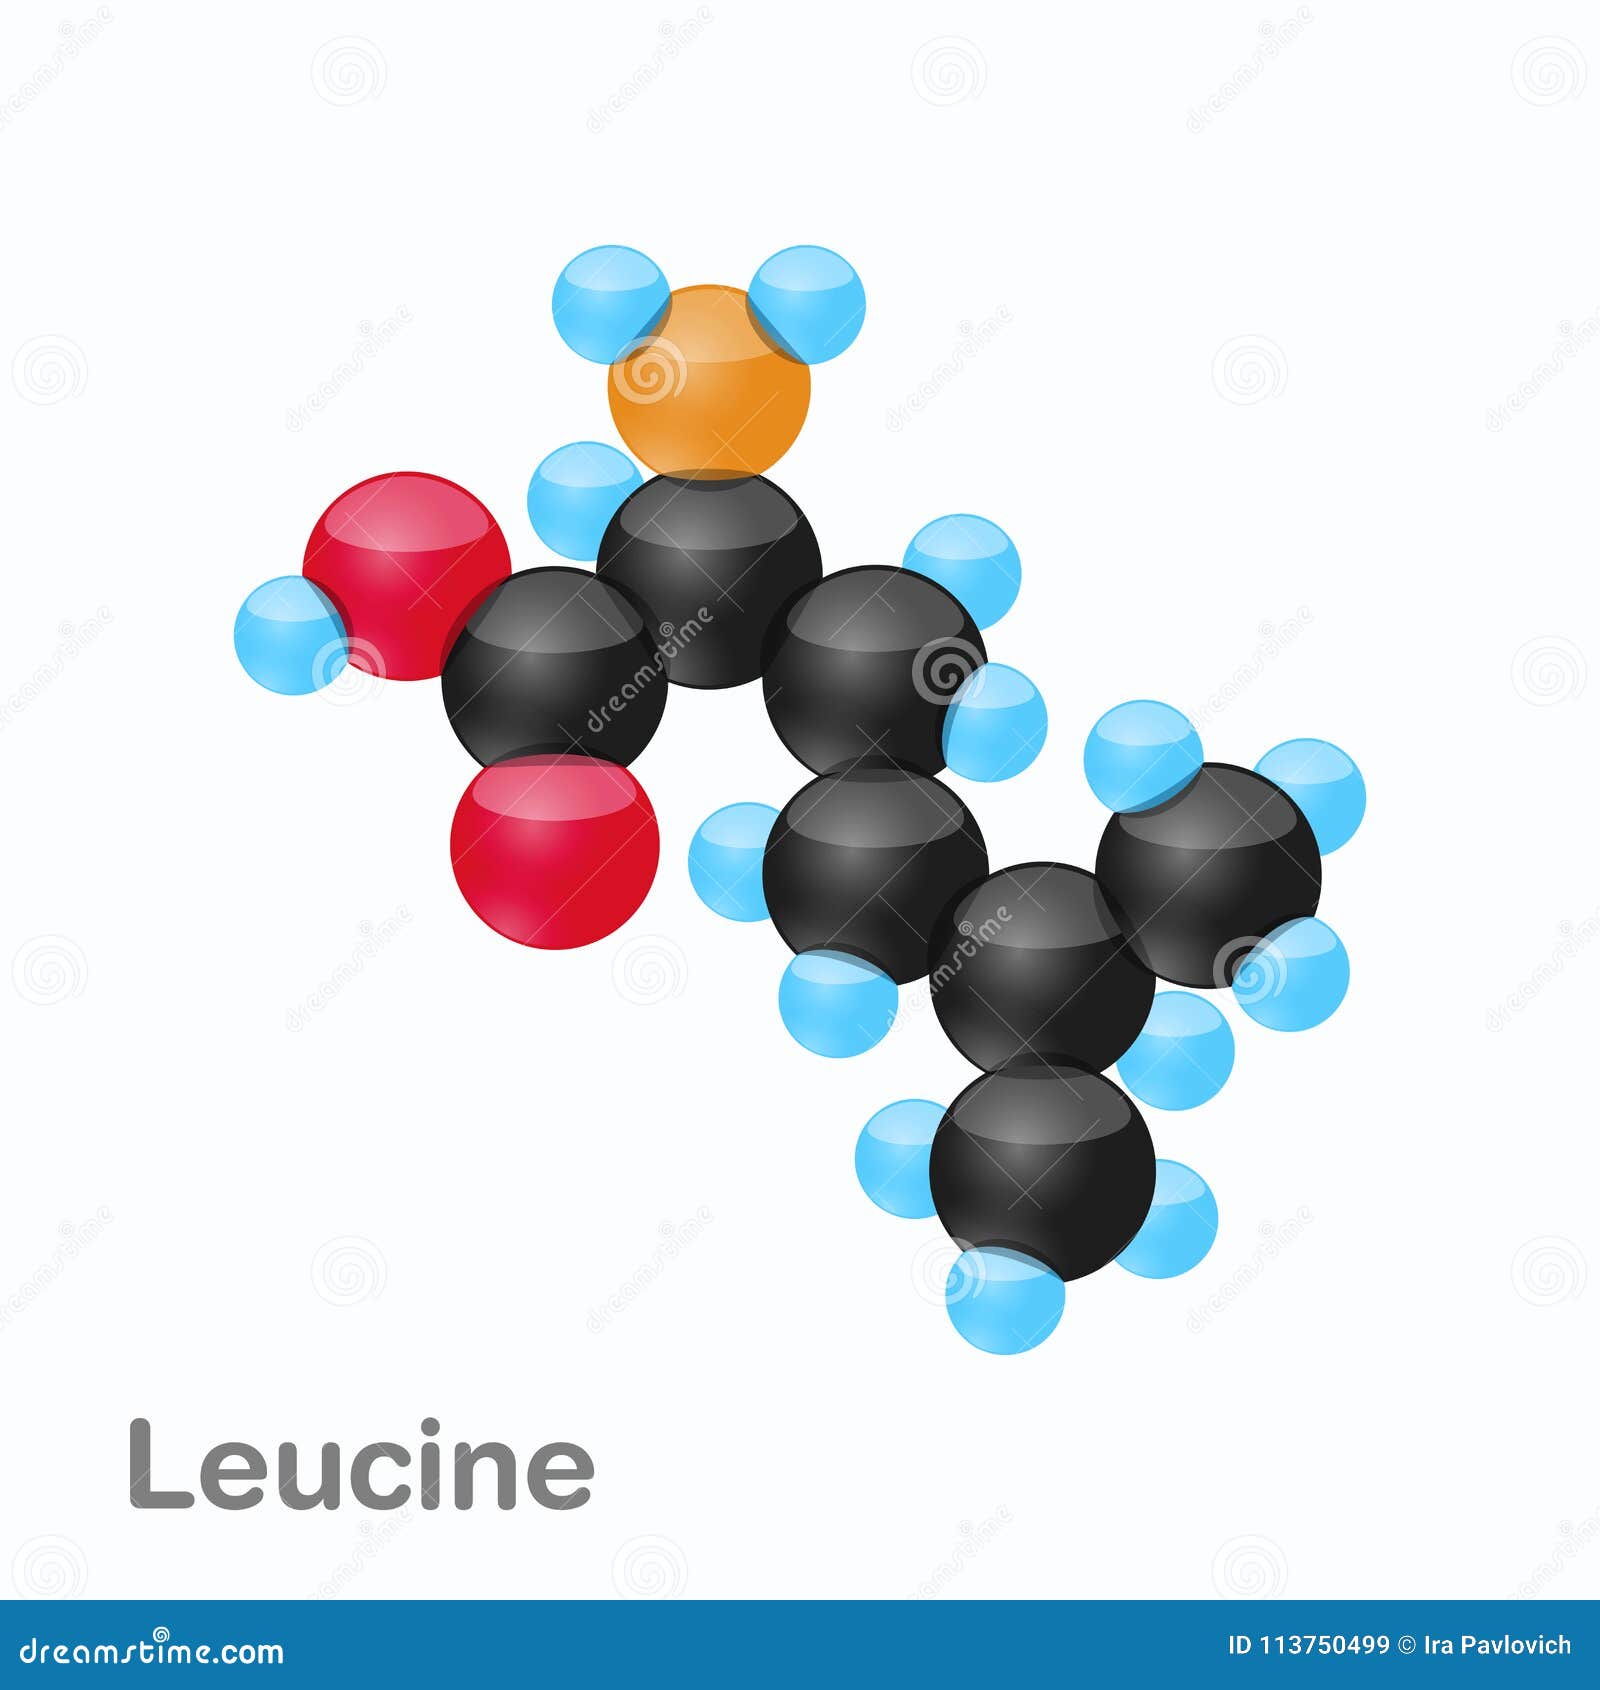 molecule of leucine, leu, an amino acid used in the biosynthesis of proteins